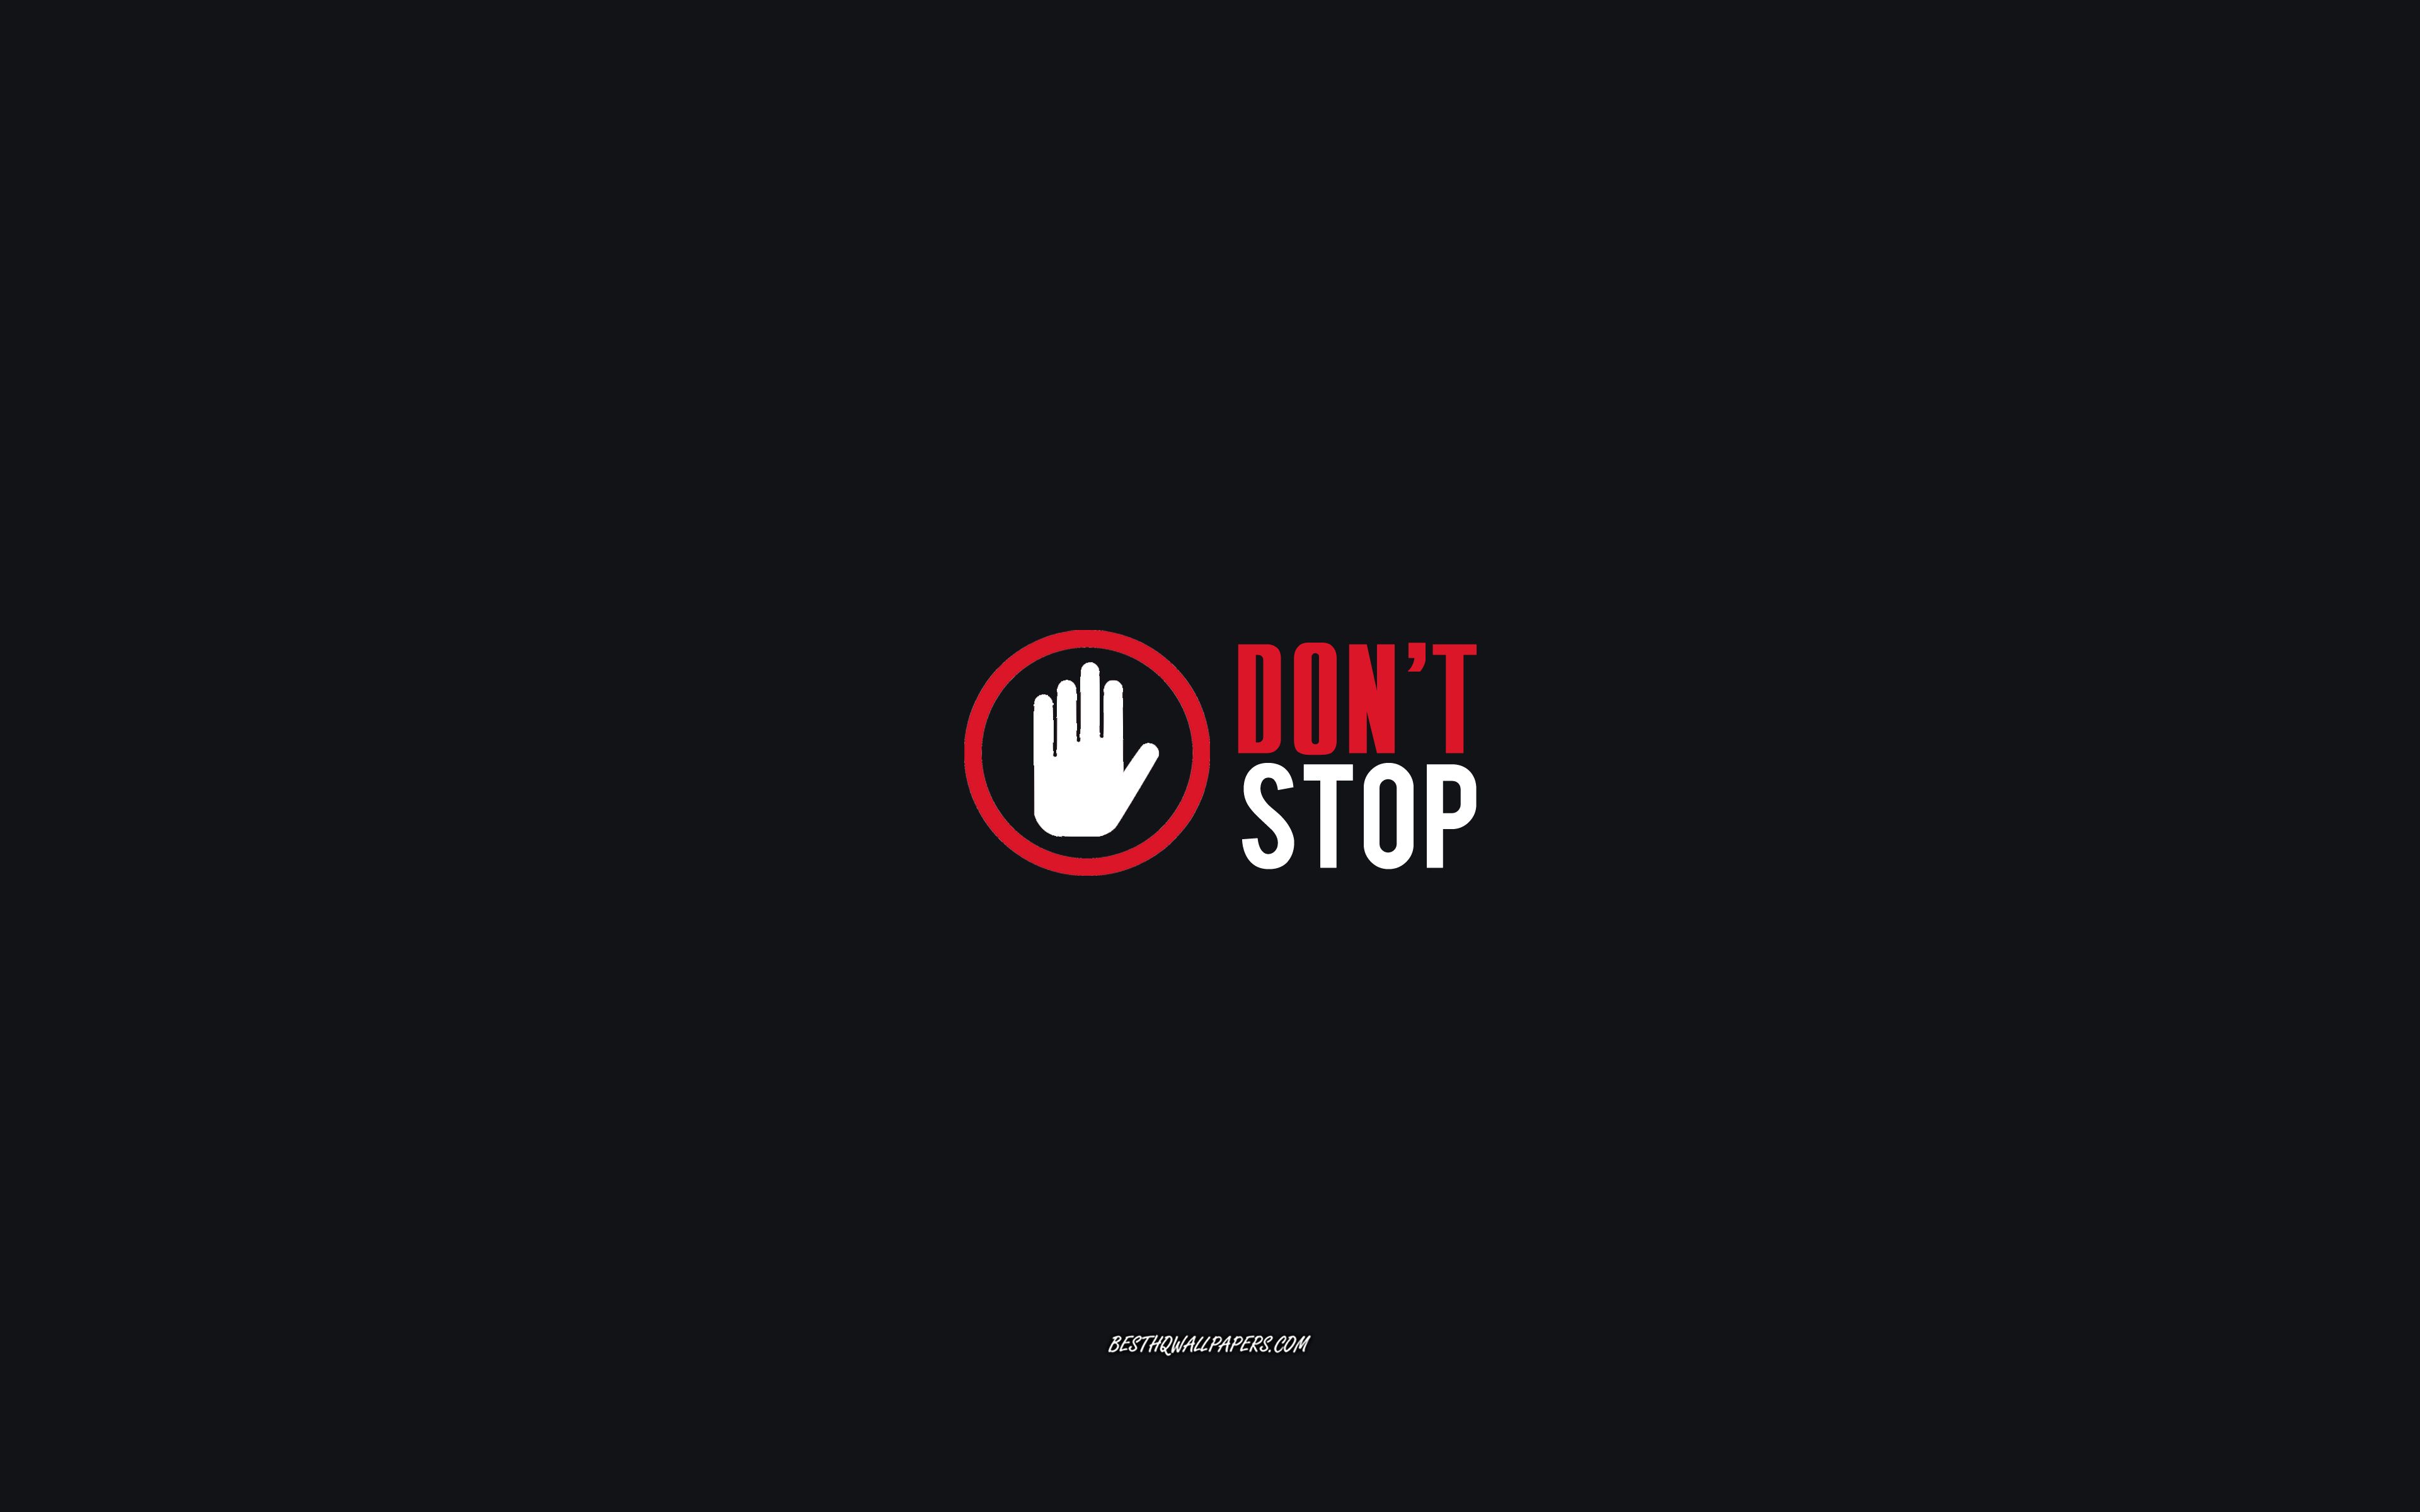 Download wallpaper Dont stop, minimalism art, stop icon, creative art, motivation, Dont stop concepts for desktop with resolution 3840x2400. High Quality HD picture wallpaper